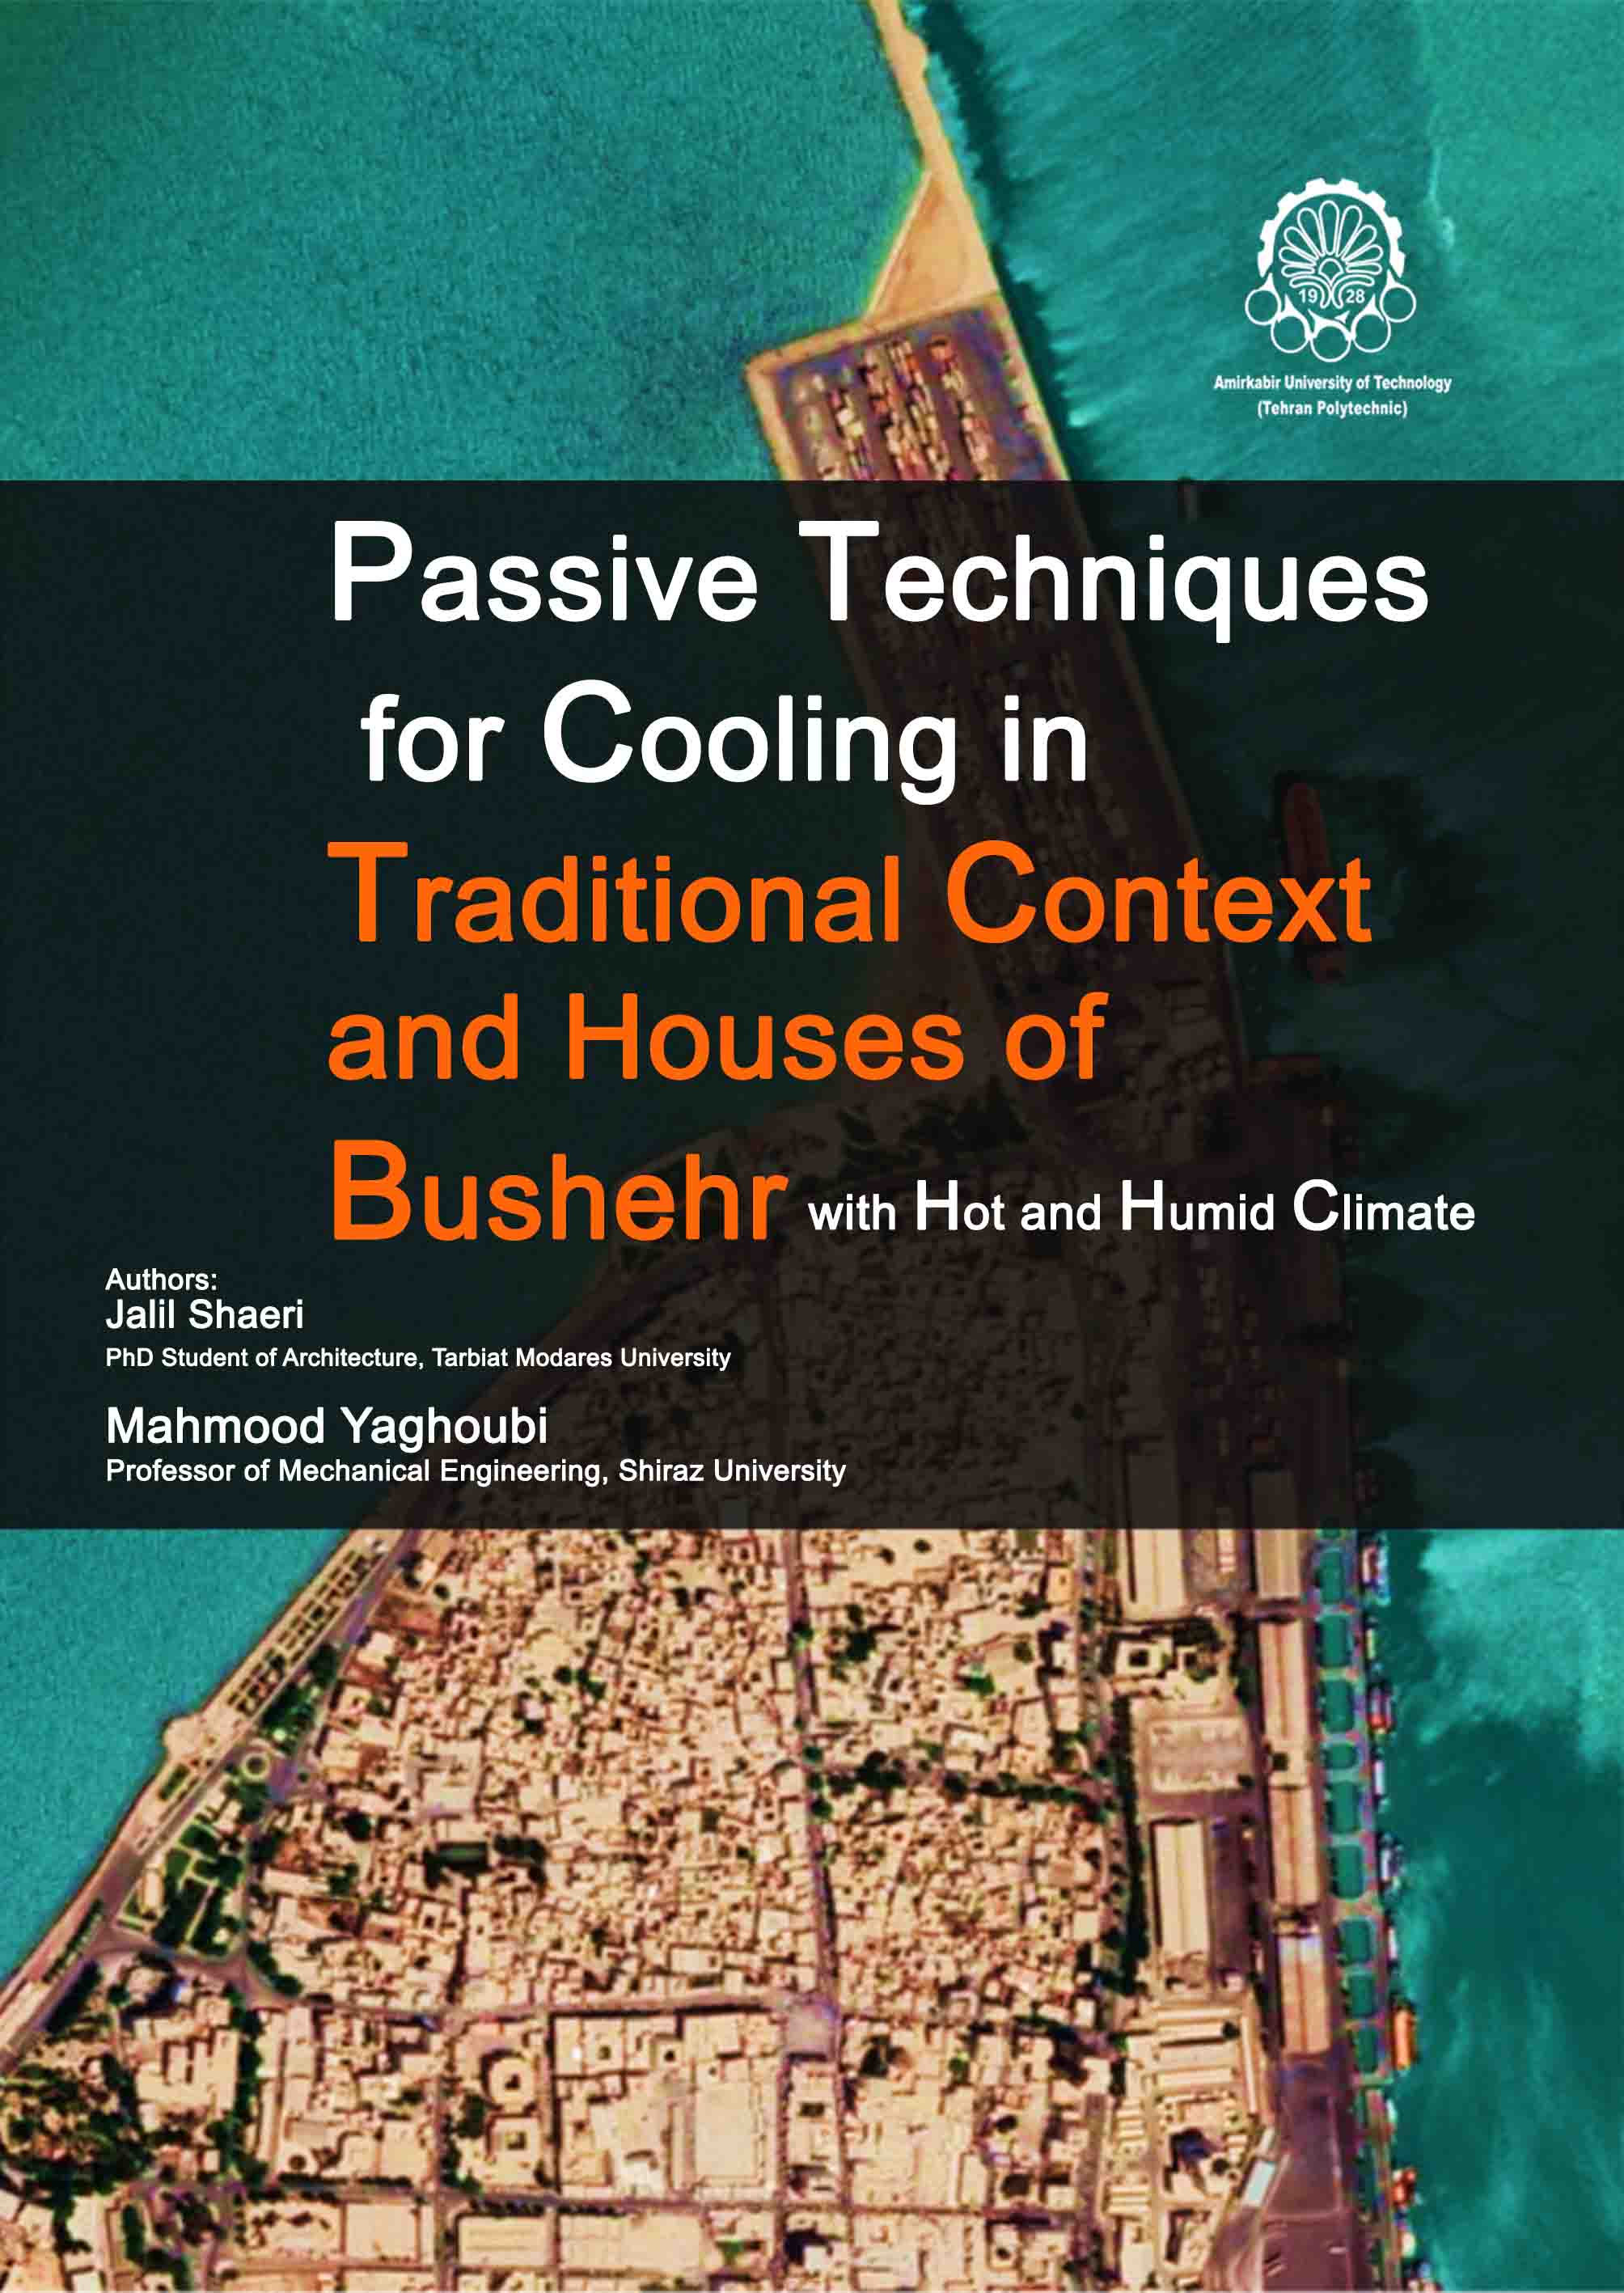 Passive Techniques for Cooling in Traditional Context and Houses of Bushehr with Hot and Humid Climate 